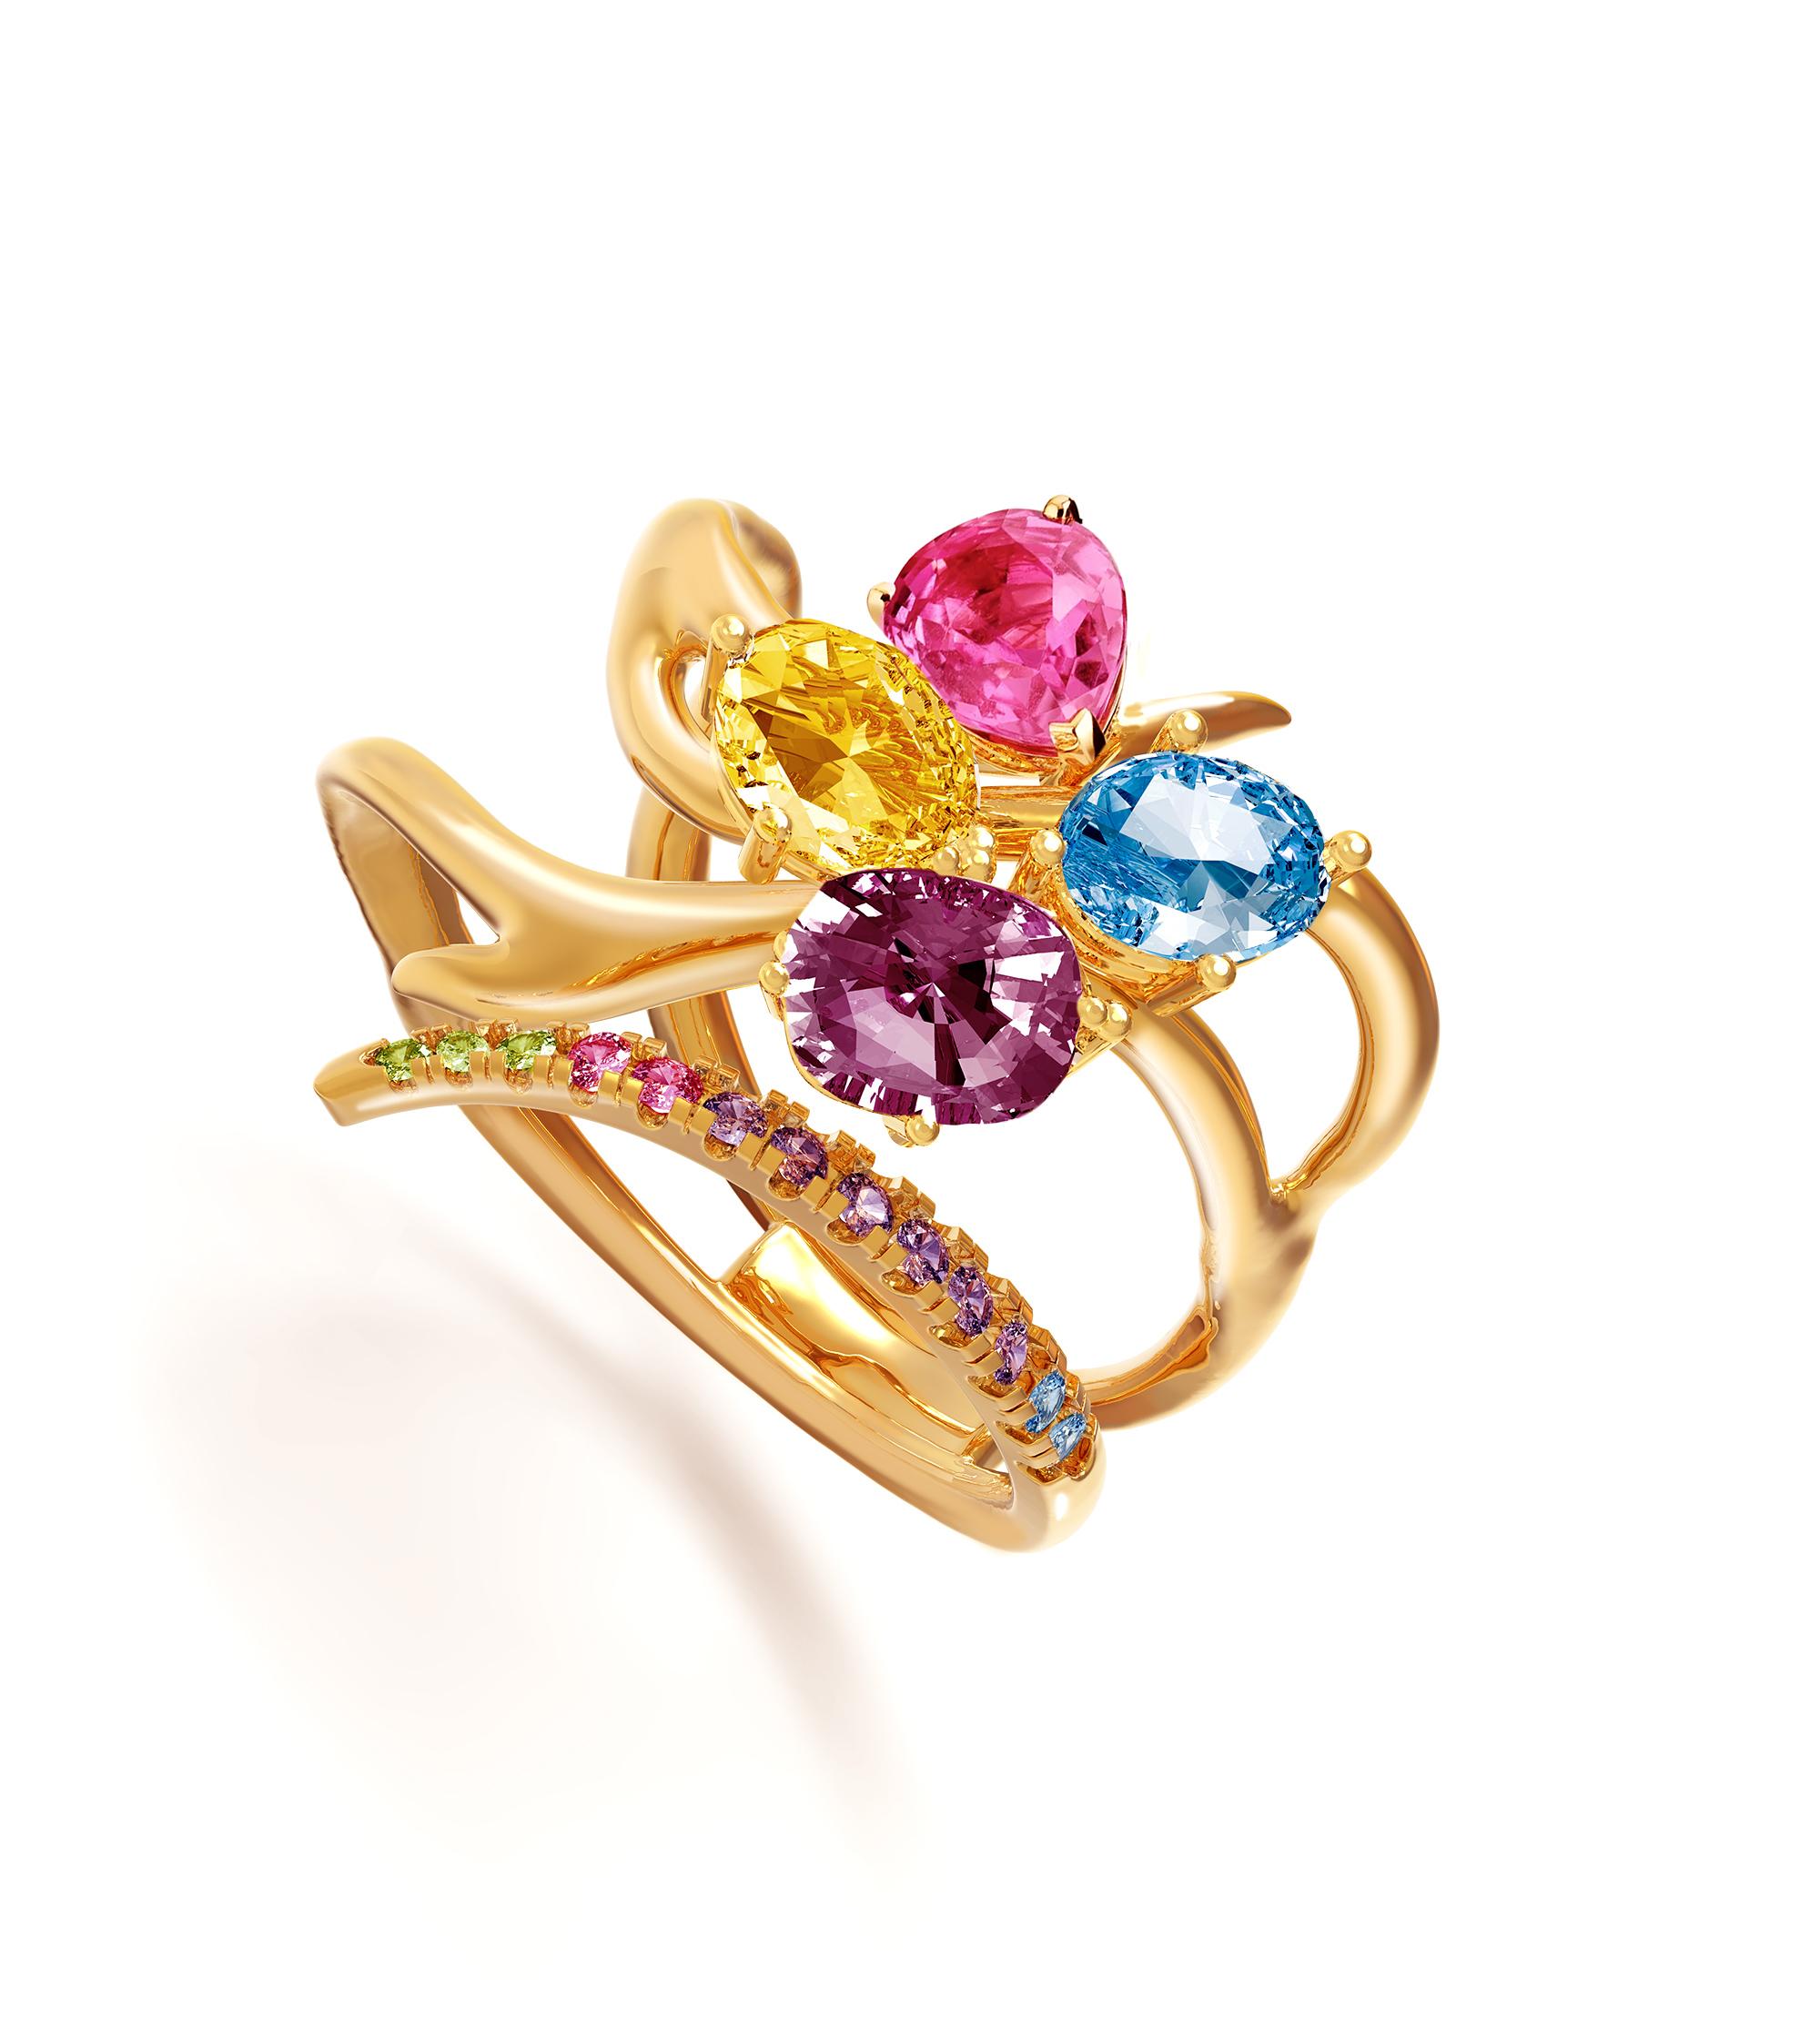 This Harajuku Anime contemporary Sculptural cocktail cluster ring is made of 18 karat yellow gold with natural gems on your choice custom made.
The gems are:
Oval or pear cut pink sapphire, 2,17 carats;
Unheated untreated yellow sapphire in oval